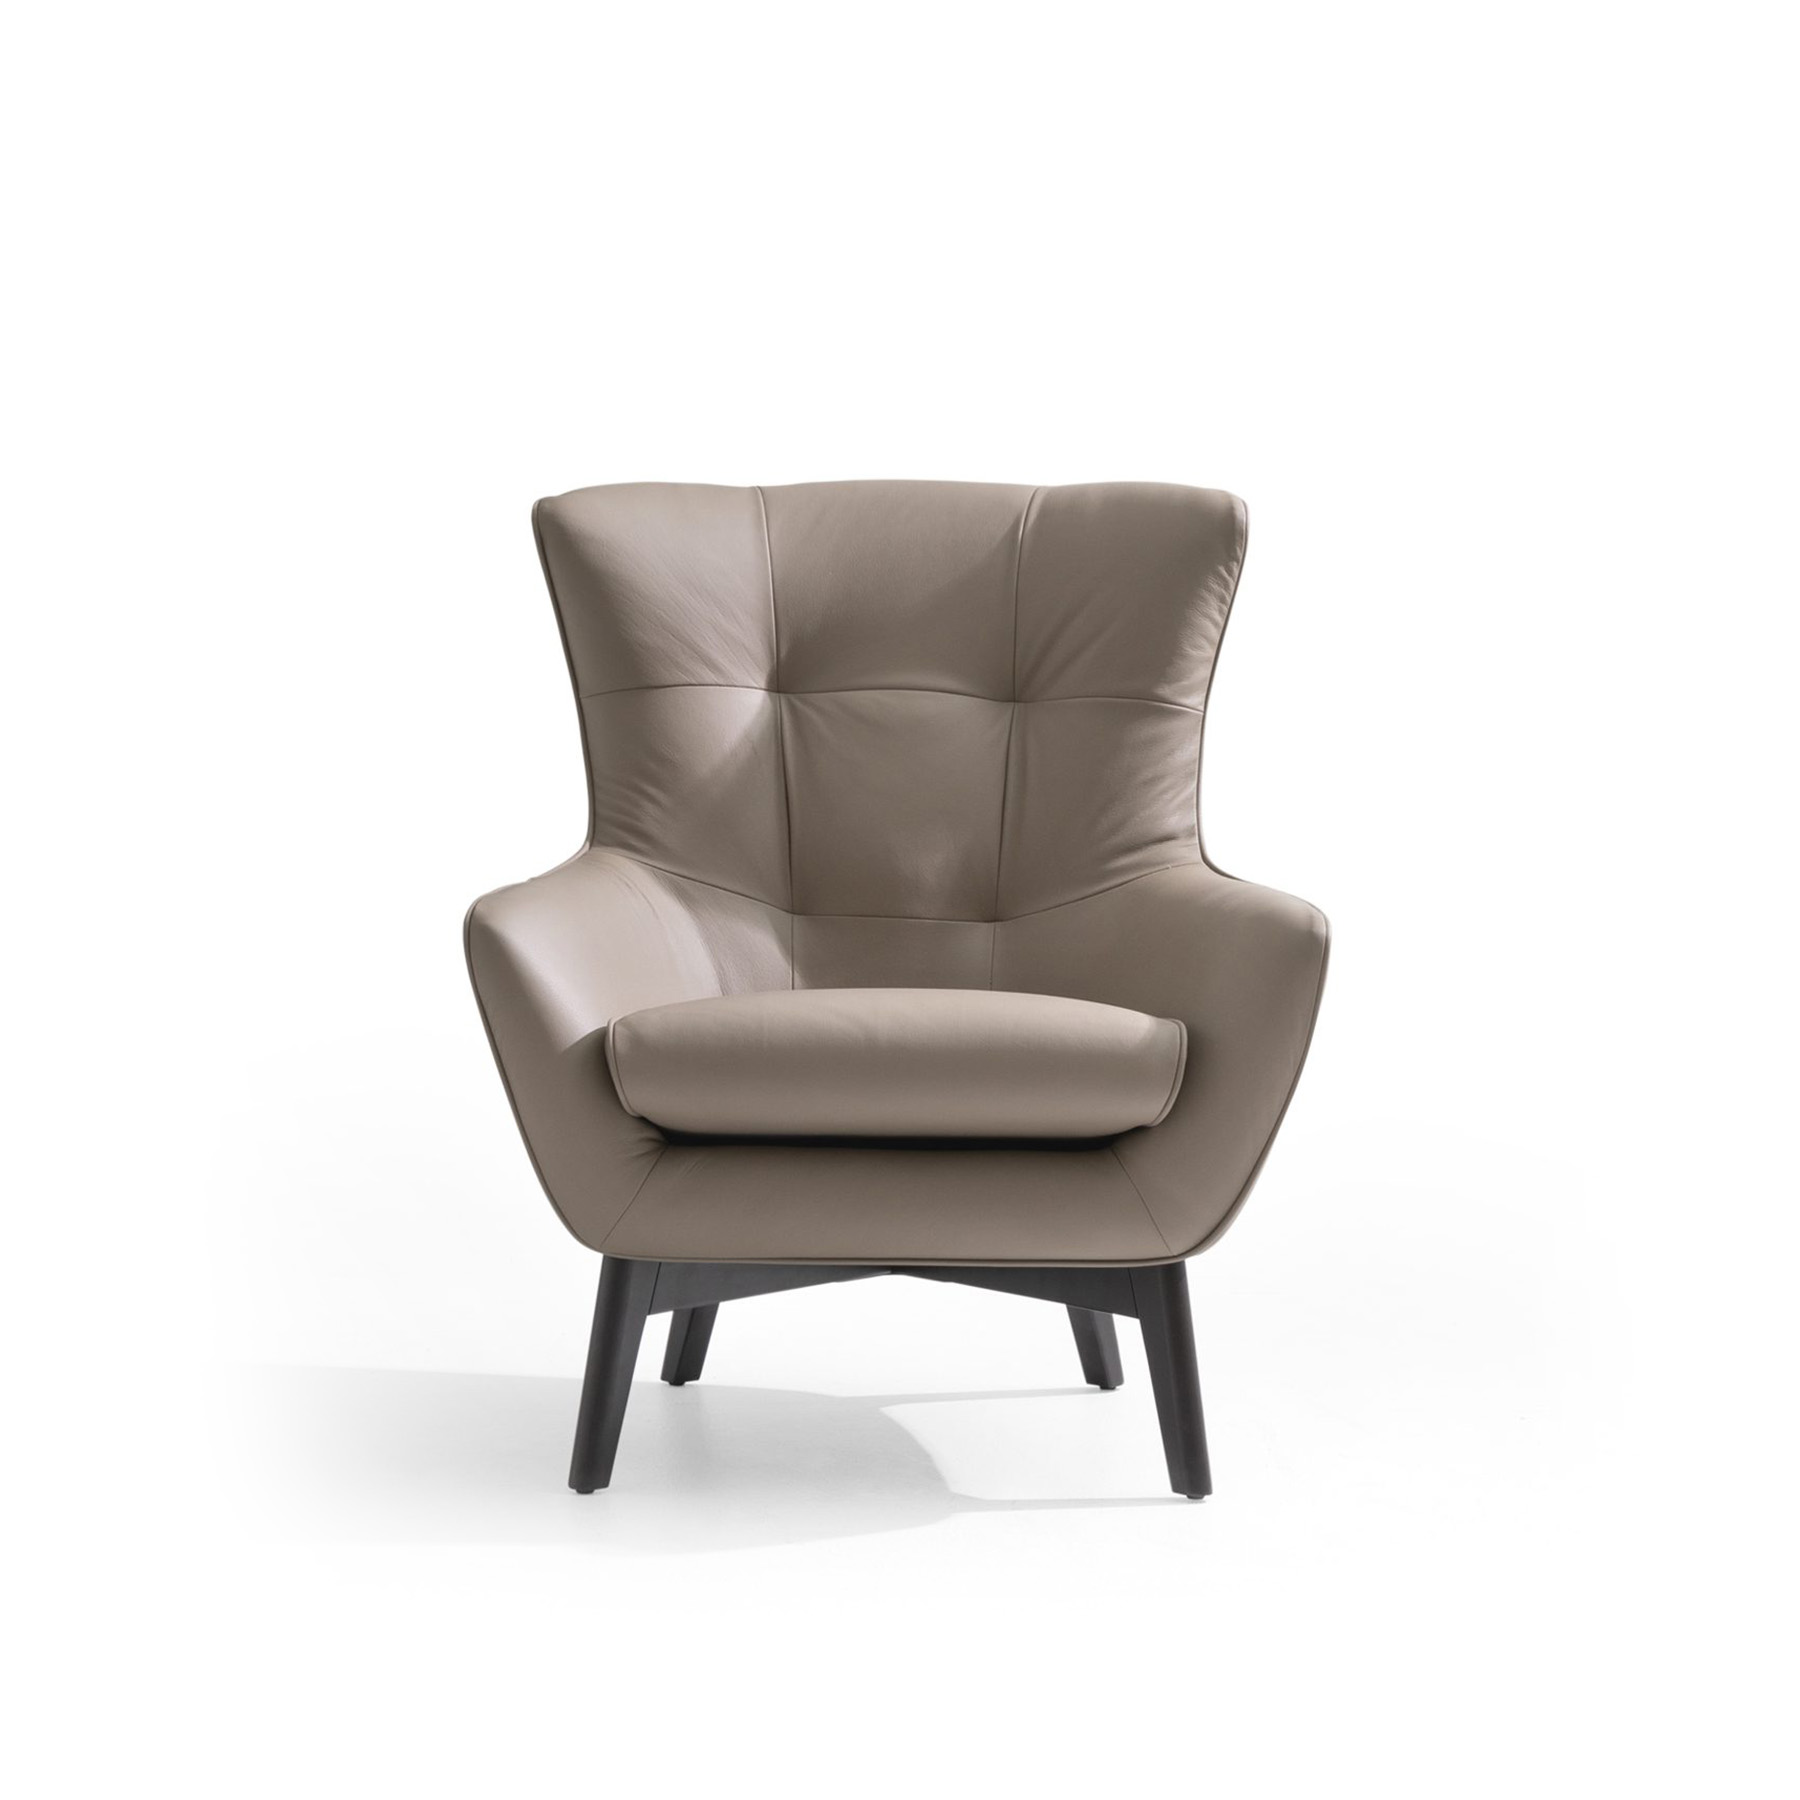 gray leather maserati armchair very comfortable front view on a white background